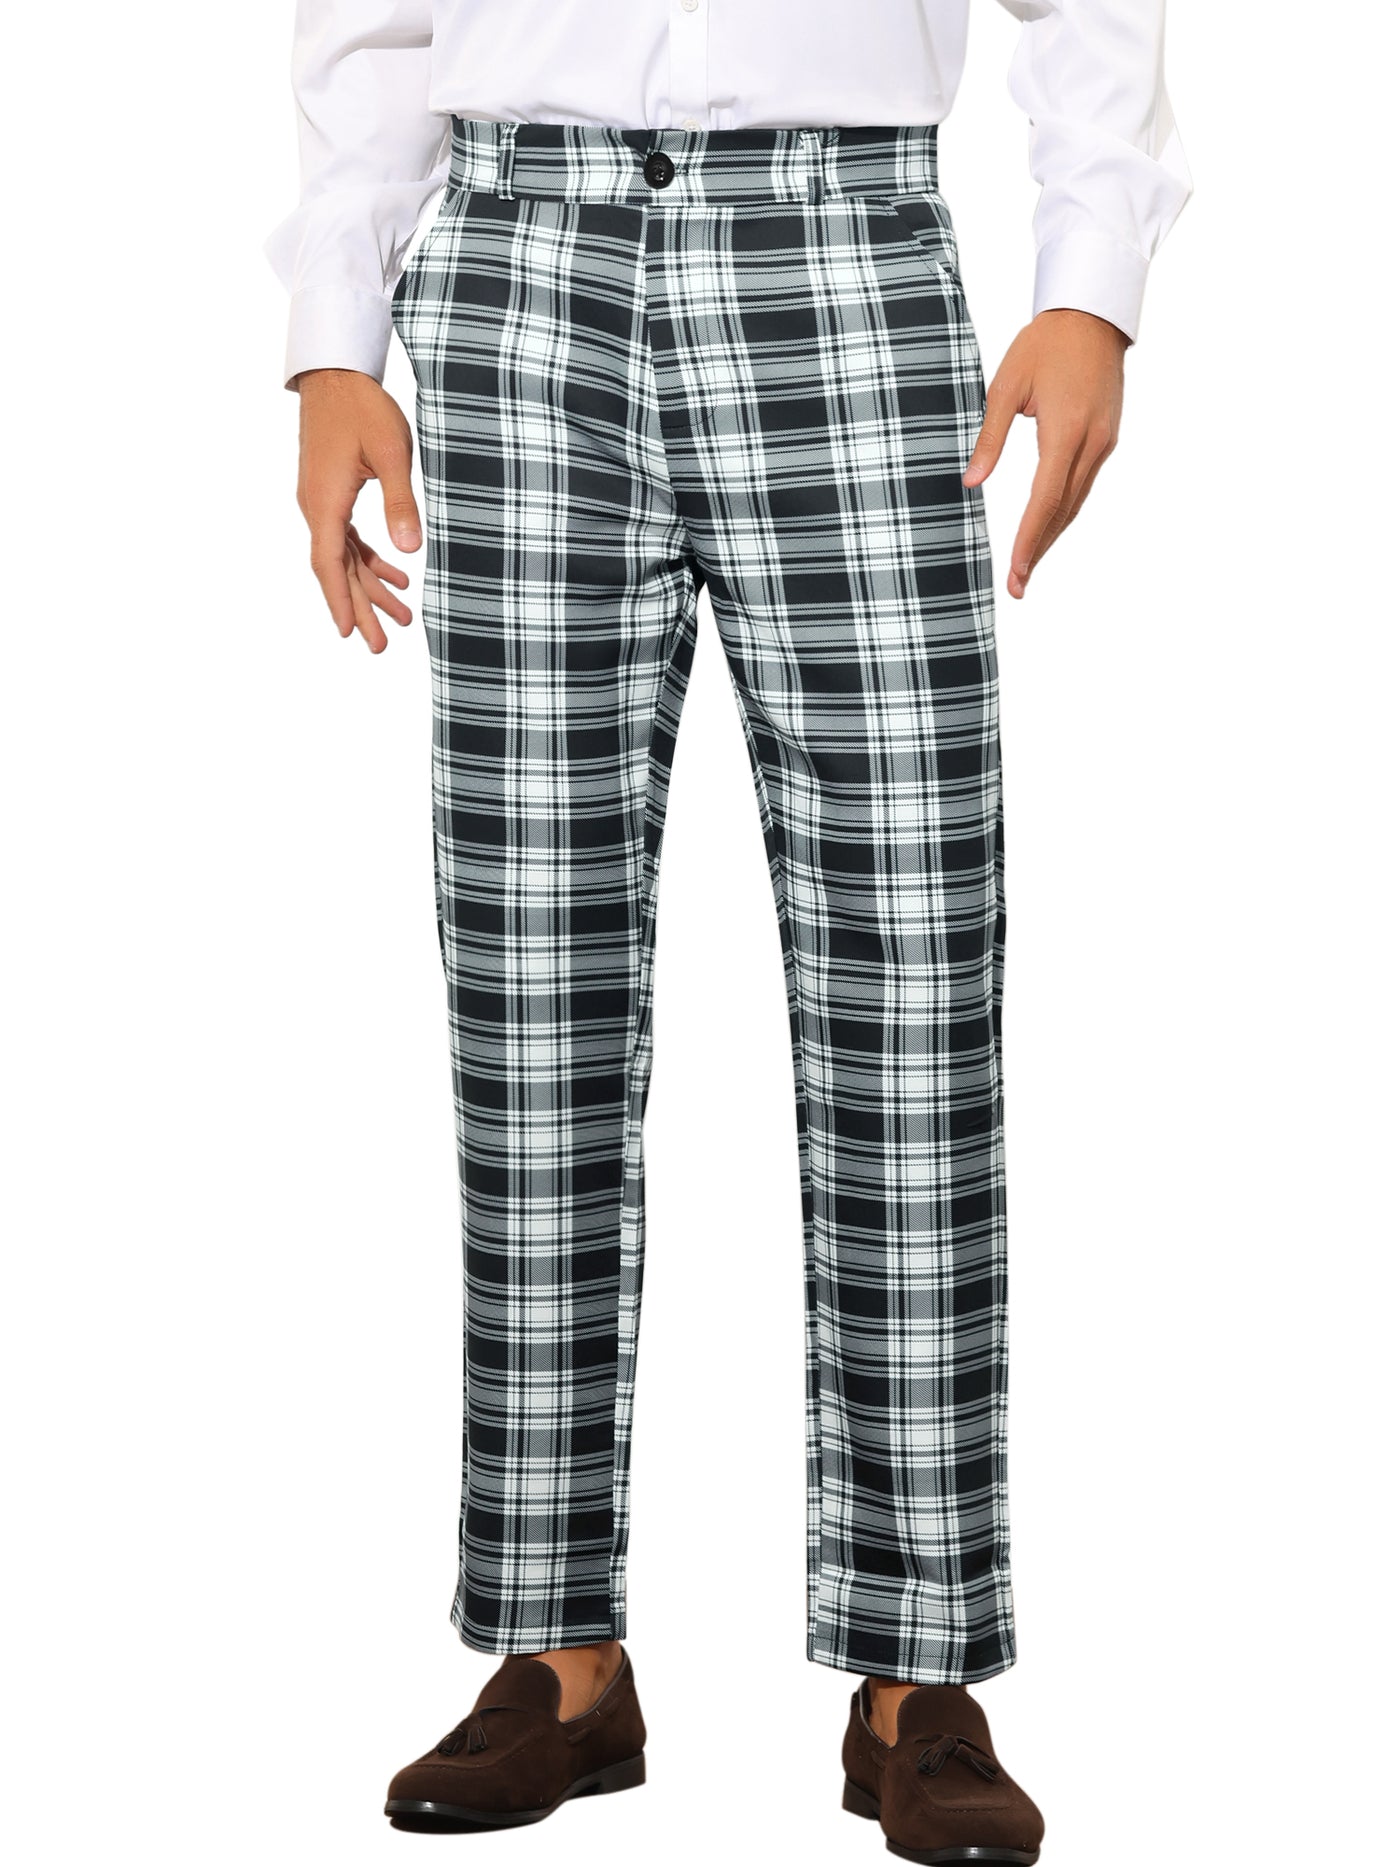 Bublédon Plaid Formal Pants for Men's Straight Fit Flat Front Office Checked Pattern Trousers